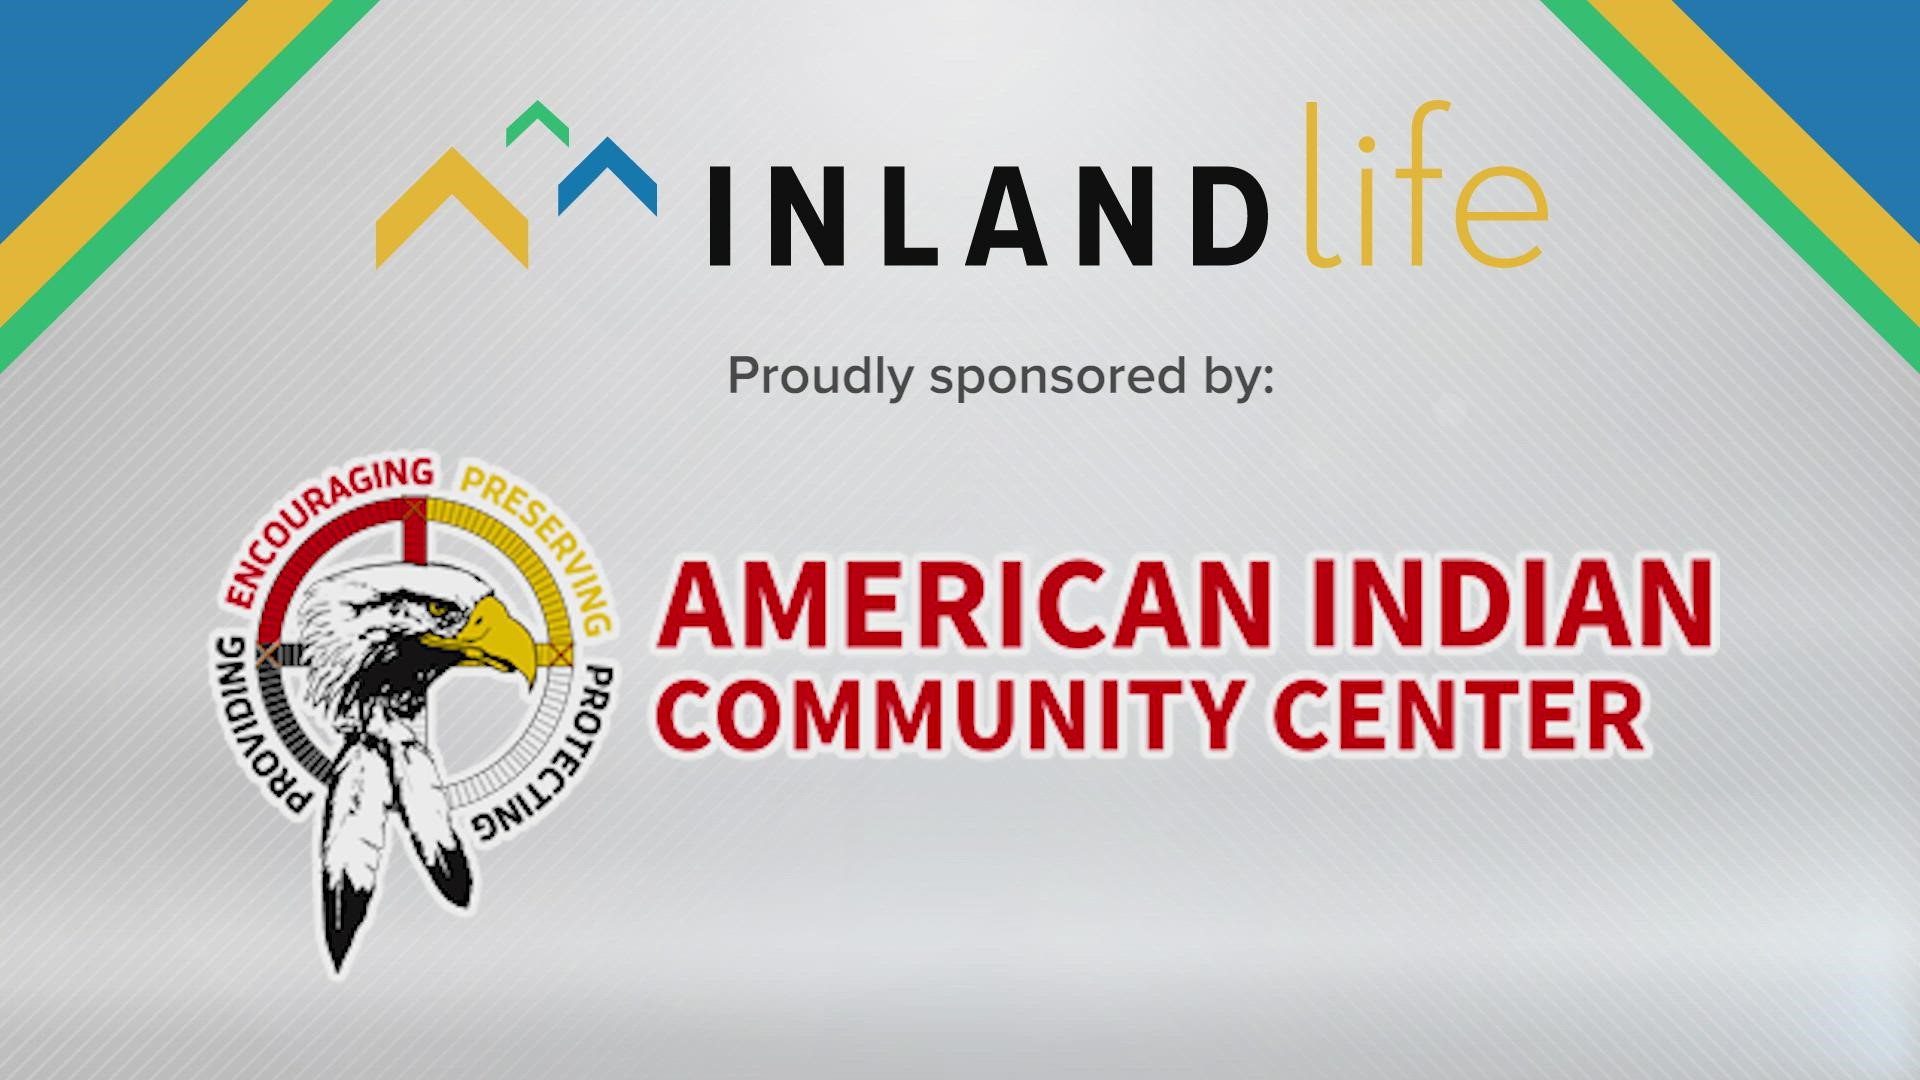 The American Indian Community Center (AICC) is a non-profit founded in 1967 as a social gathering place for American Indians,